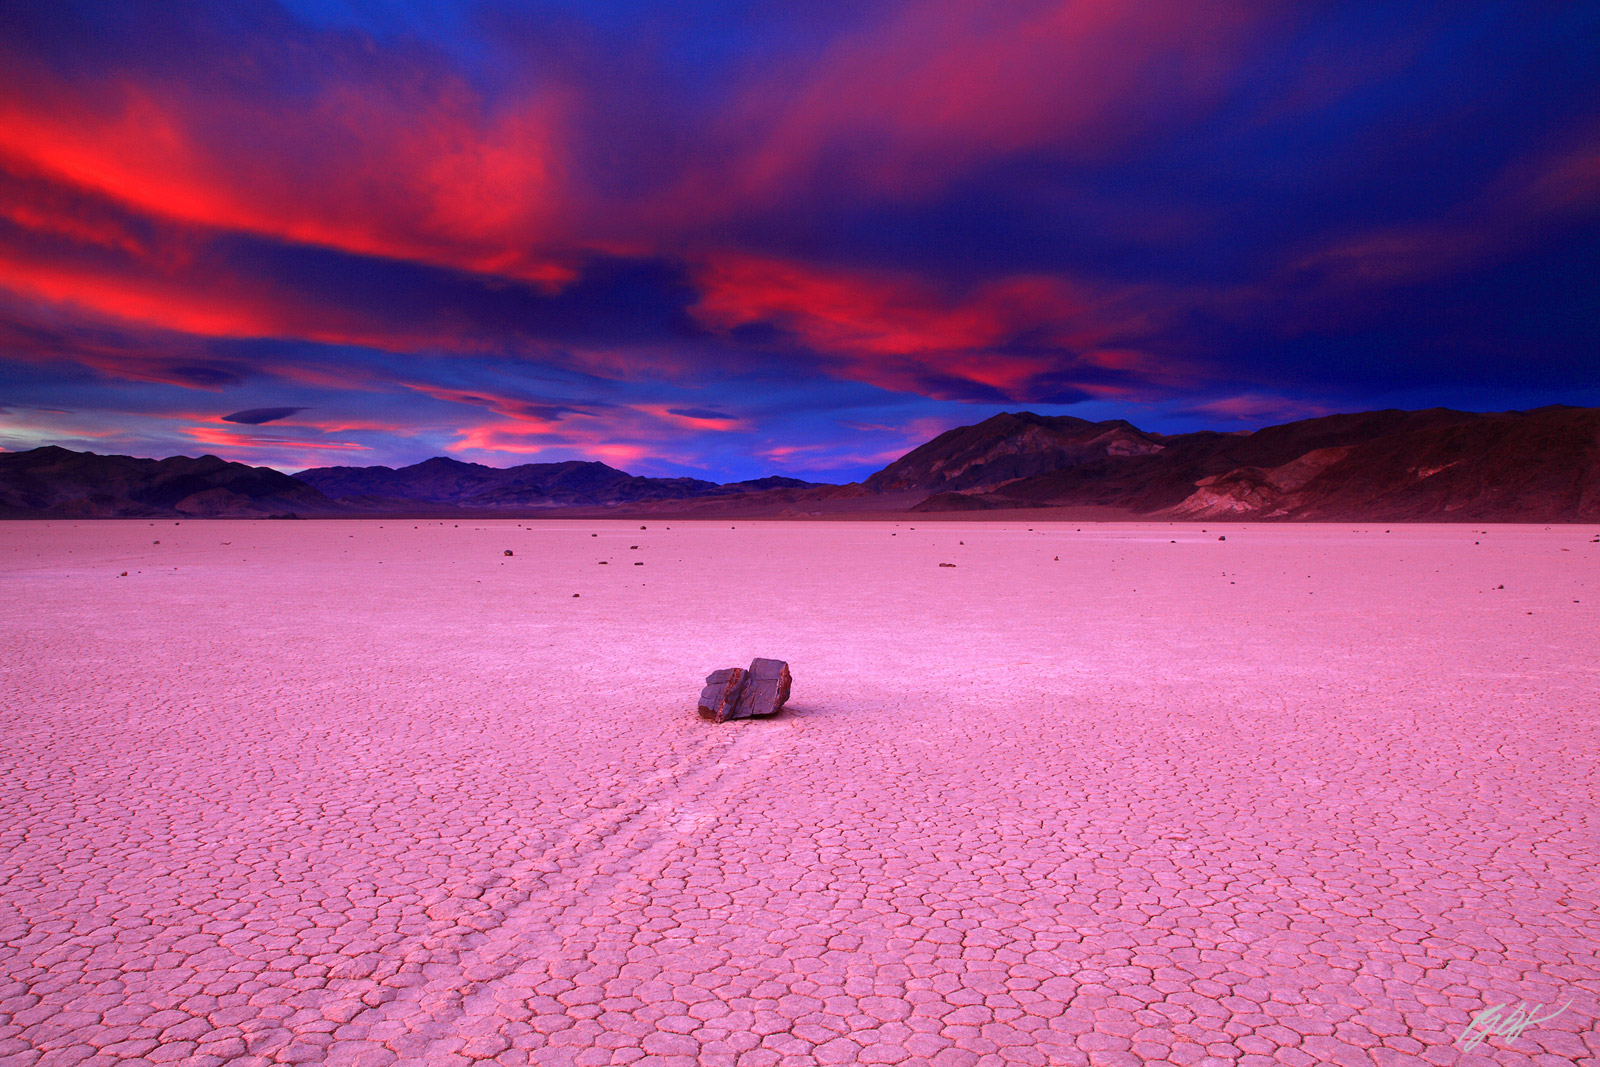 Sunset on the Race Track in Death Valley National Park, California